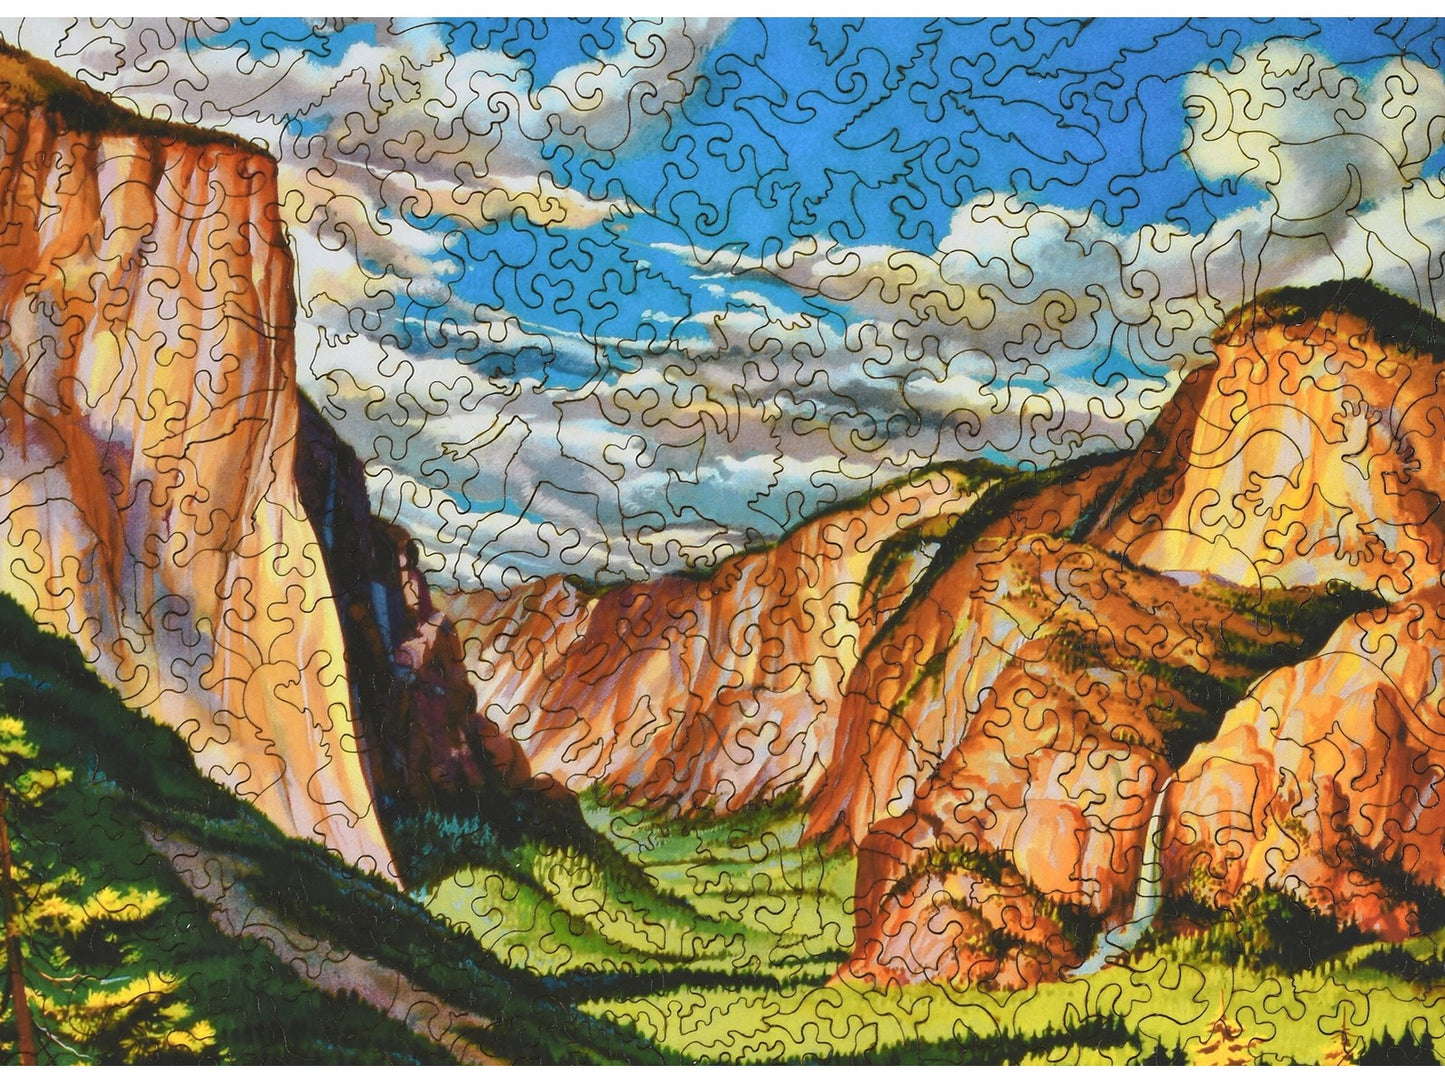 A closeup of the front of the puzzle, Yosemite United Airlines, showing the detail in the pieces.